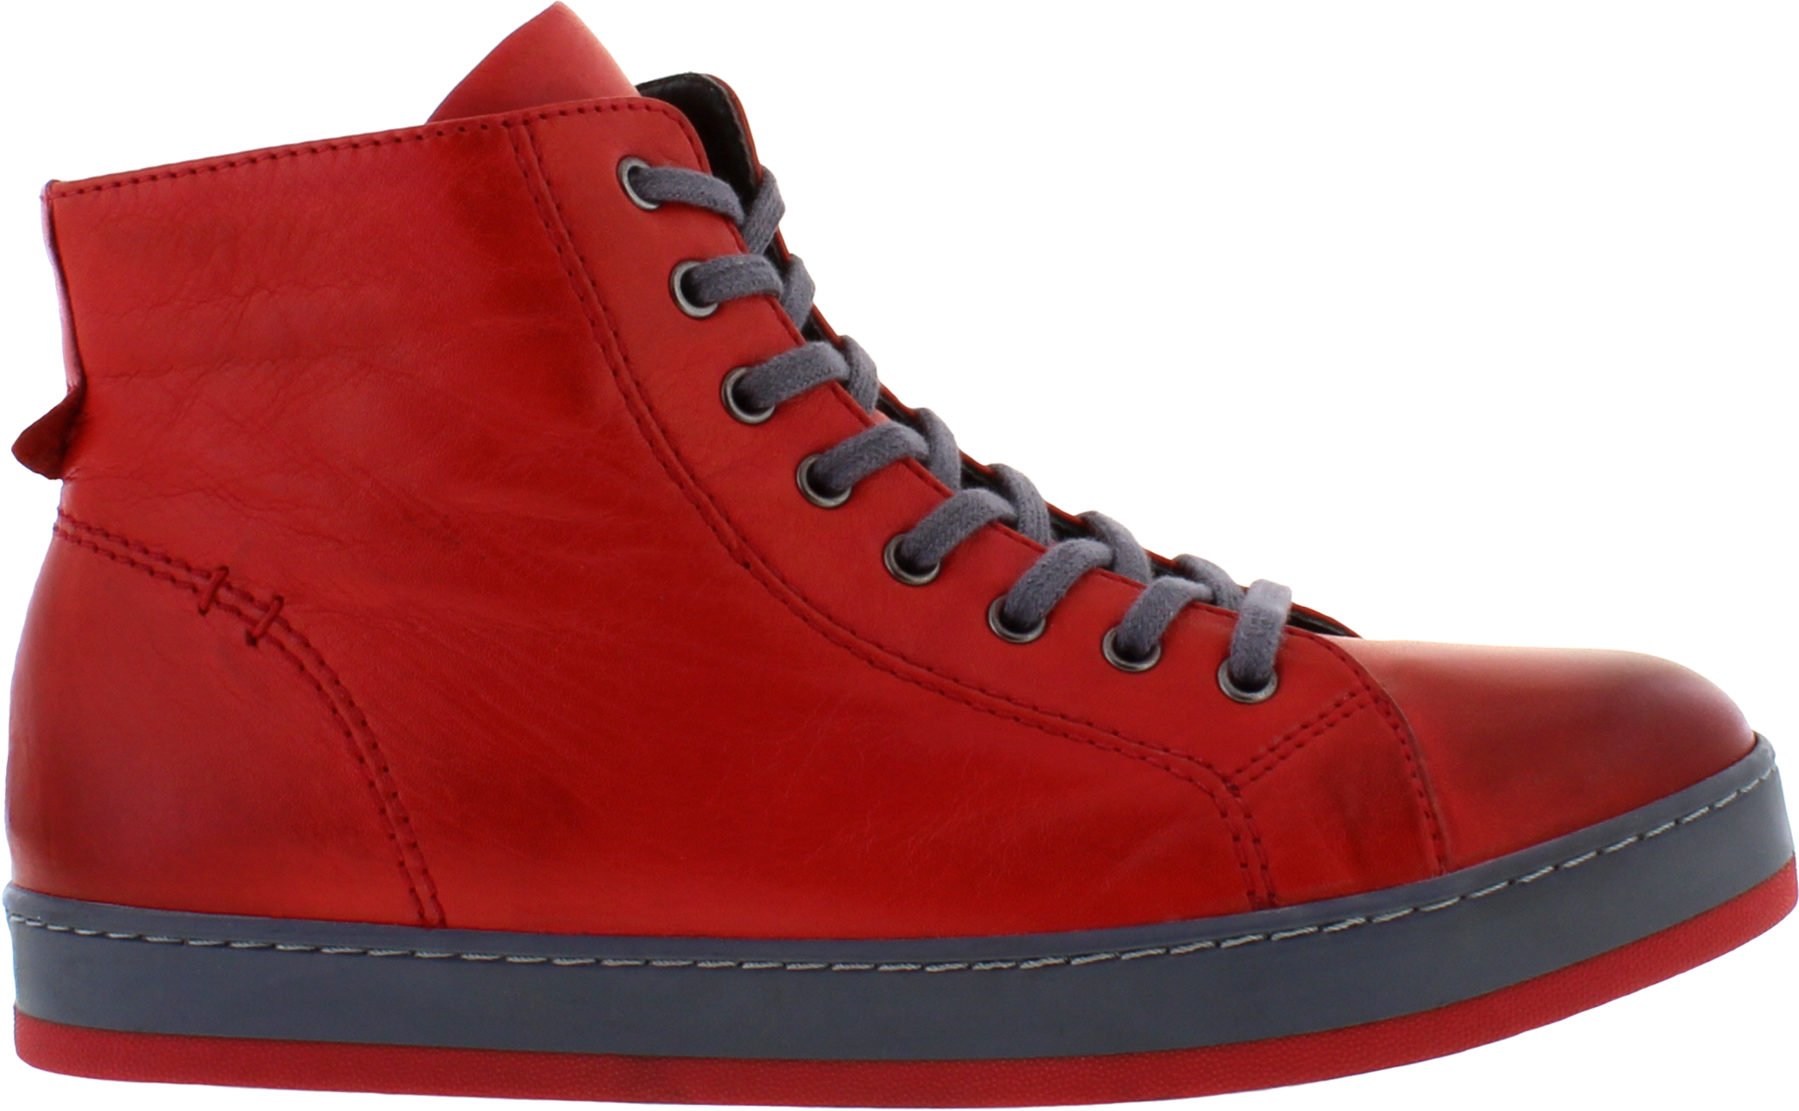 Adesso A6246 Ladies Yankee Red Leather Lace Up Ankle Boots